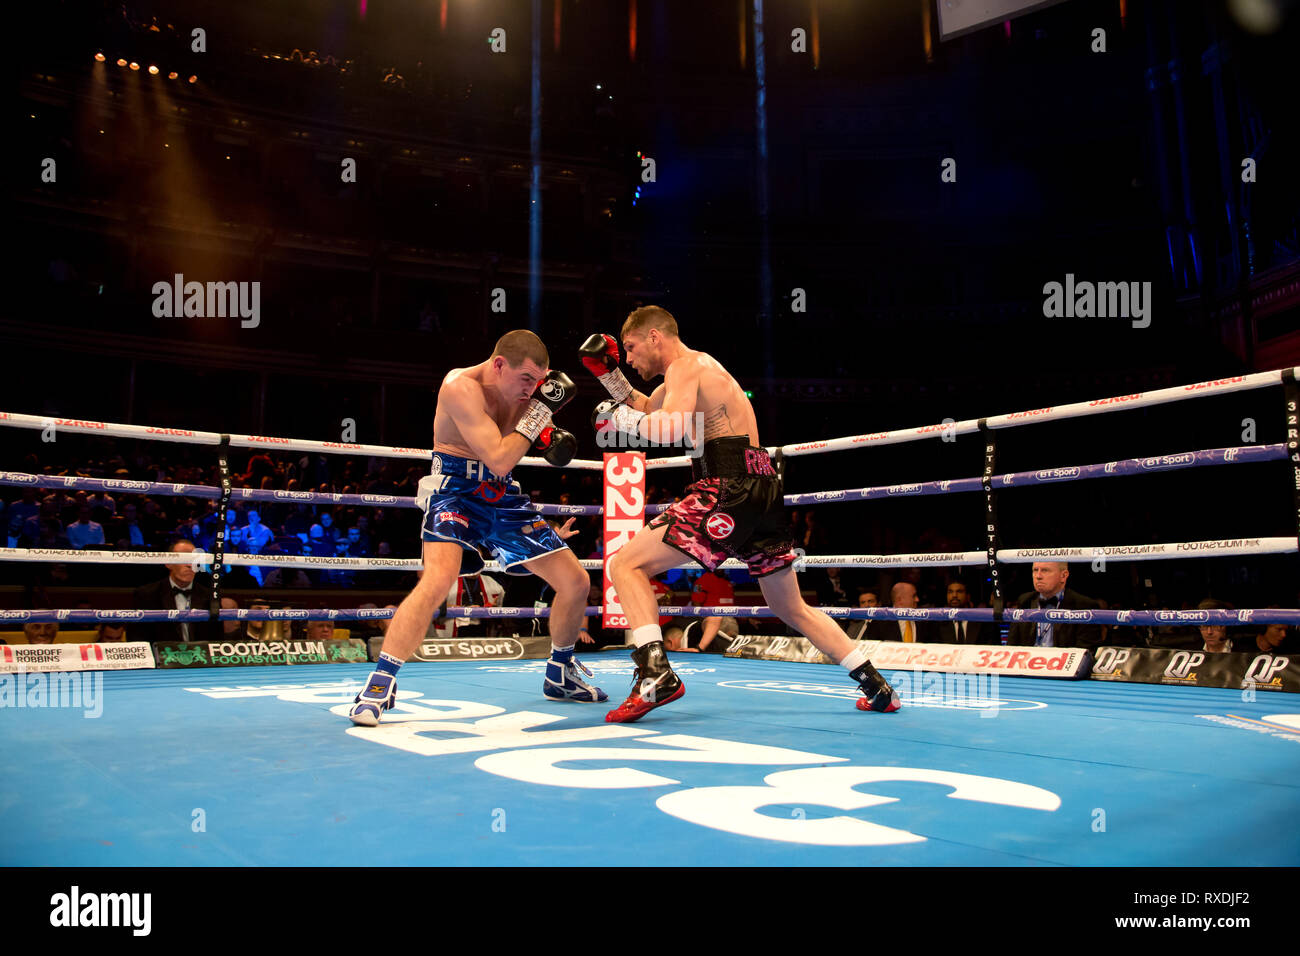 London uk 8th March 2019 Boxing returns to the royal albert hall kensington gore london Chris Jenkins defeats Johnny garton to become the new British welterweight Champion  Johnny Garton v Chris jenkins Credit: Dean Fardell/Alamy Live News Stock Photo